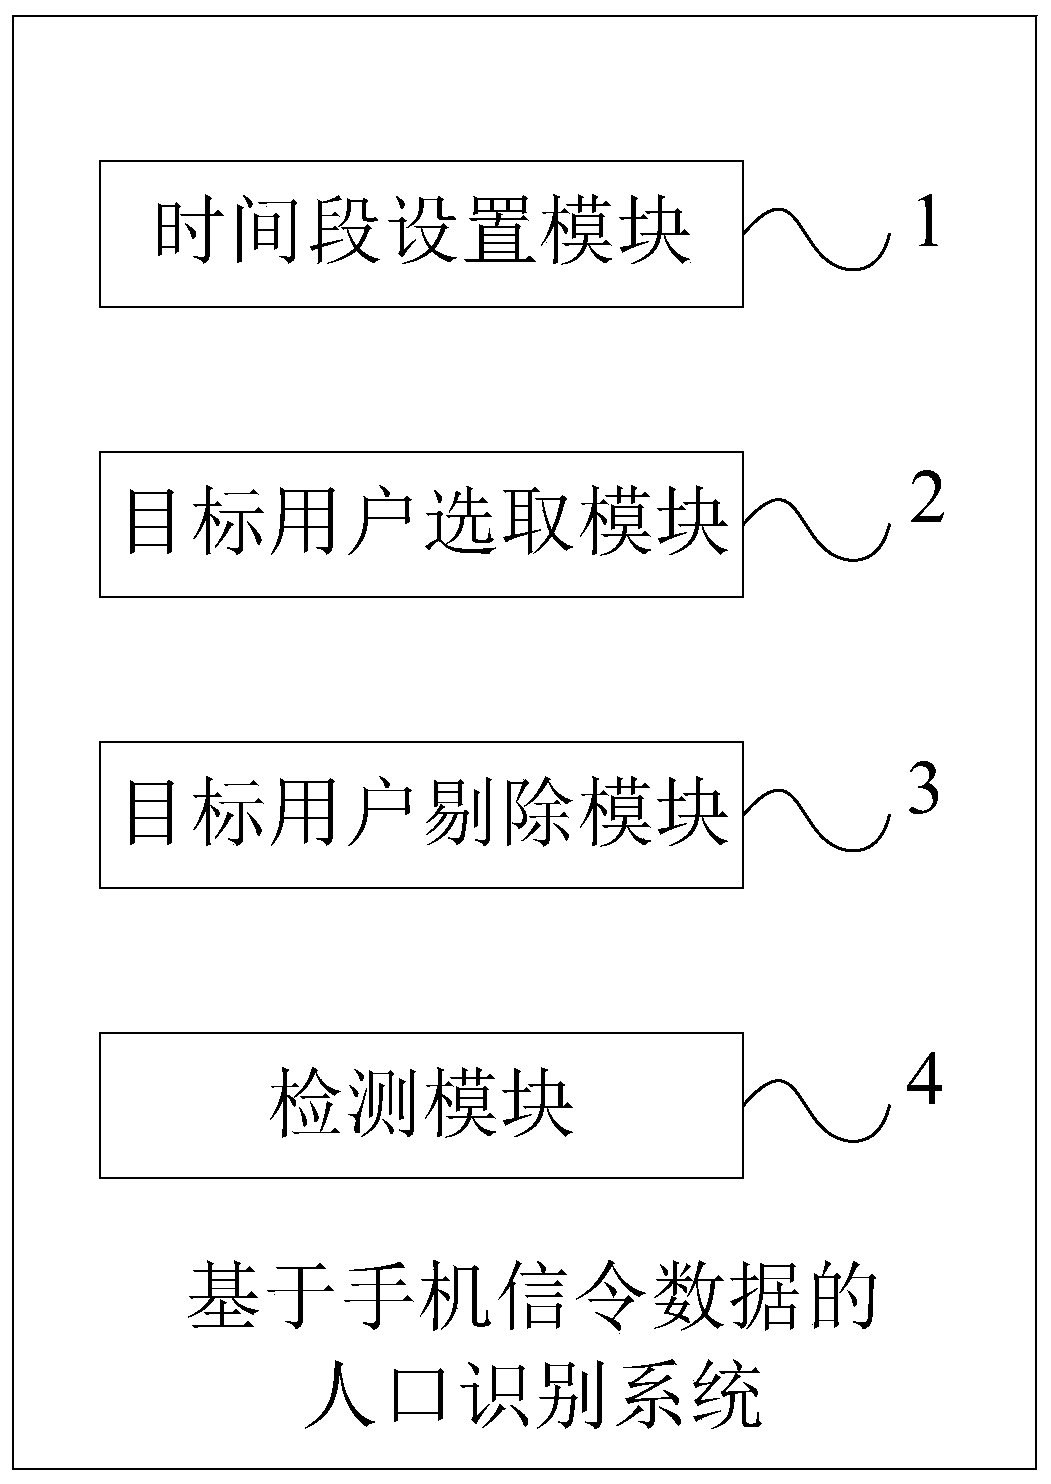 Population identification method and system based on mobile phone signaling data